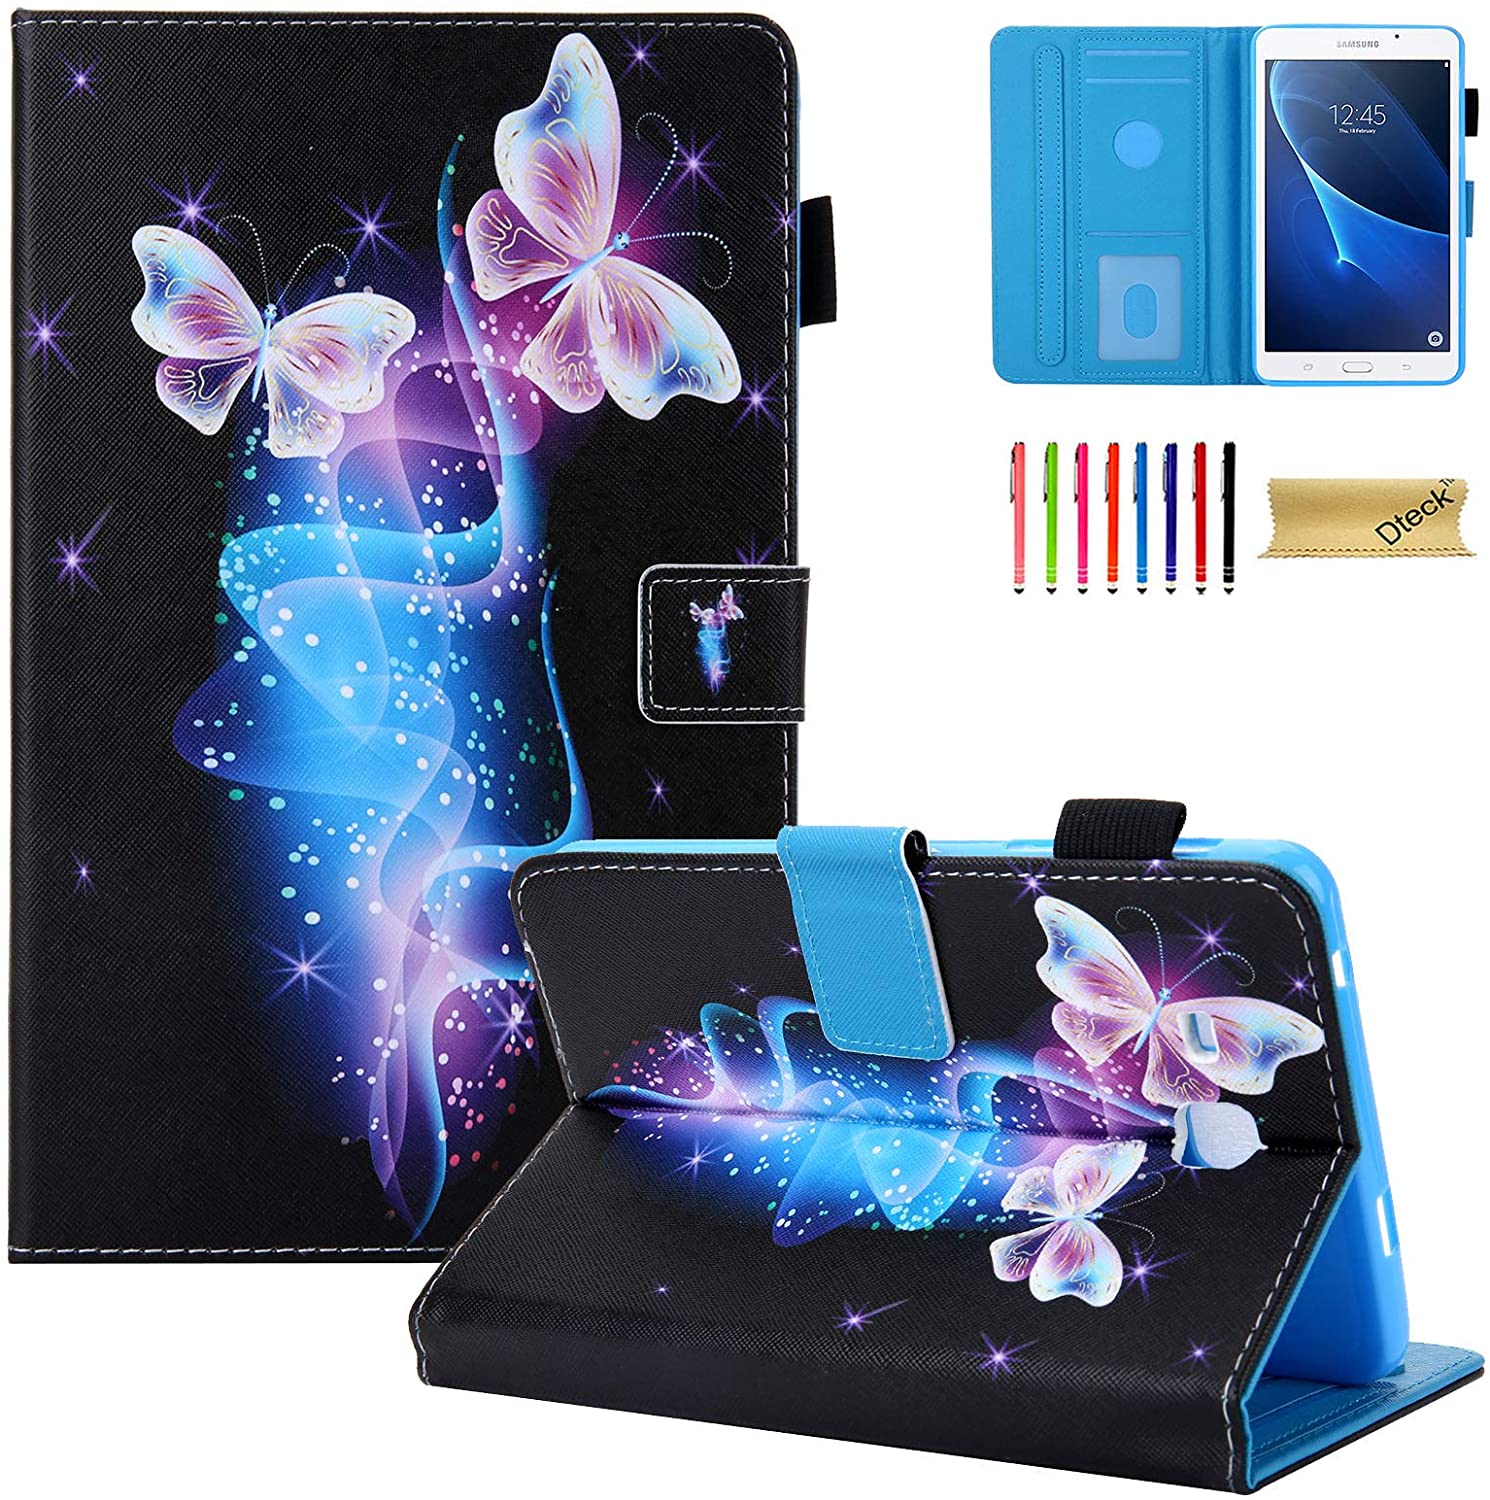 Teck Case for Samsung Galaxy Tab A 7.0 Case SM-T280   - Slim Fit PU Leather Folio Stand Protective Case Cover - e4cents